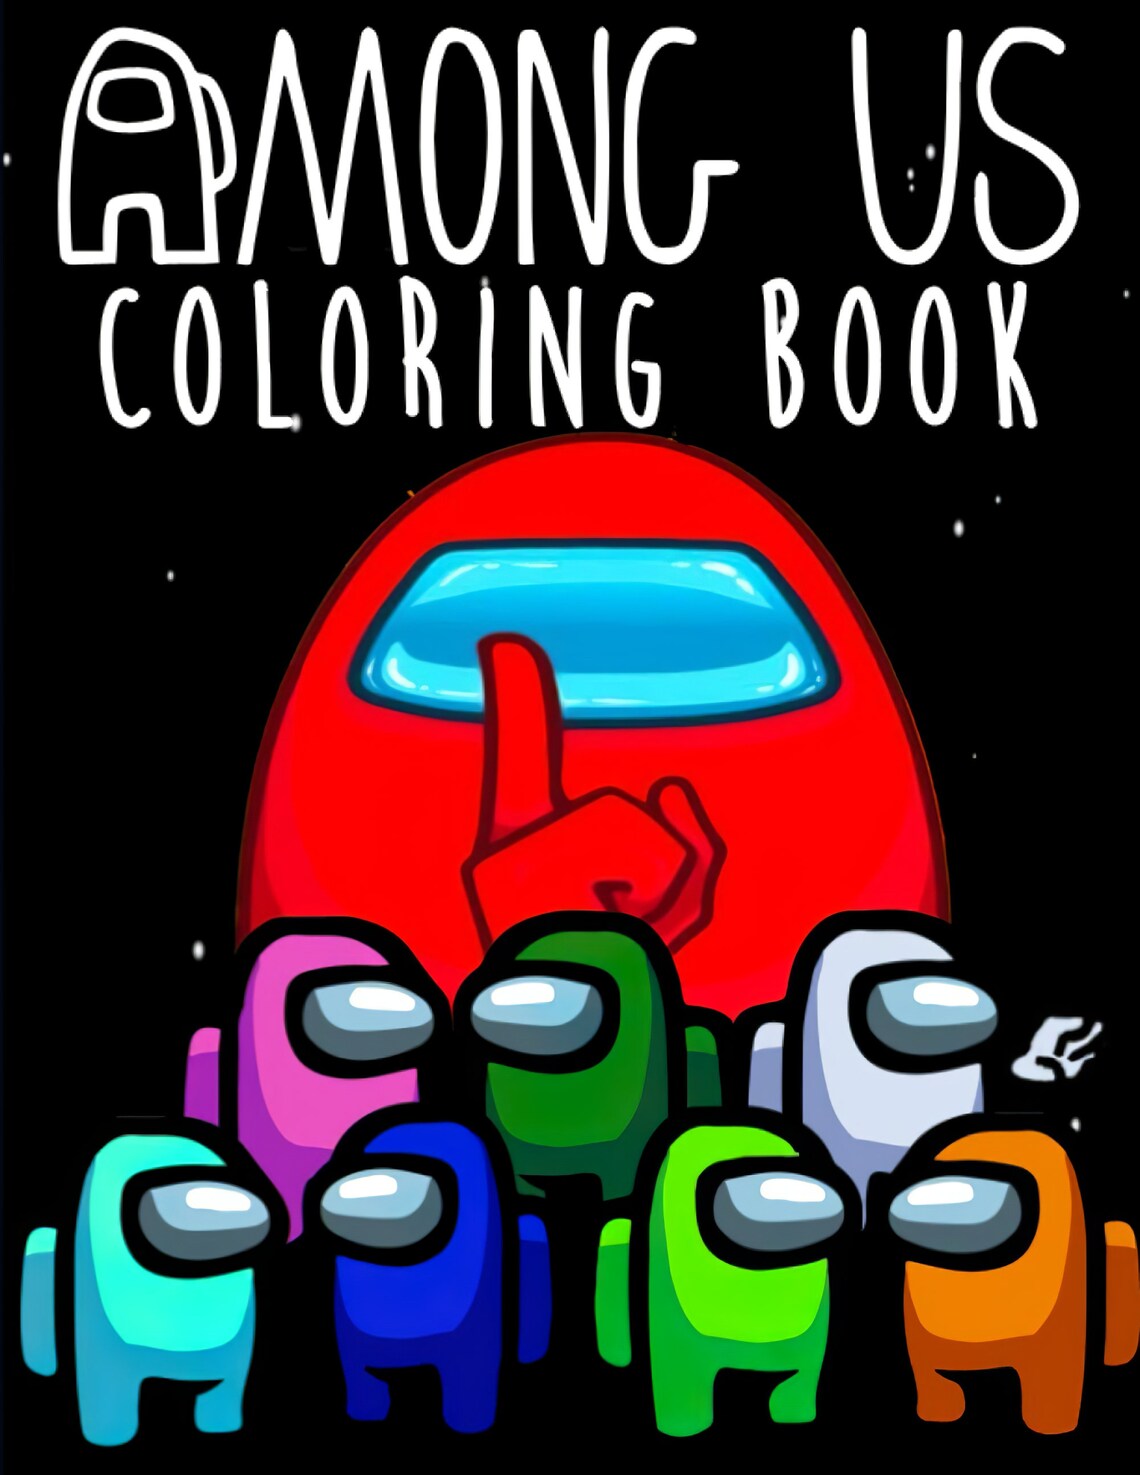 Among Us Coloring Book: 44 Illustrations Among Us Colouring | Etsy